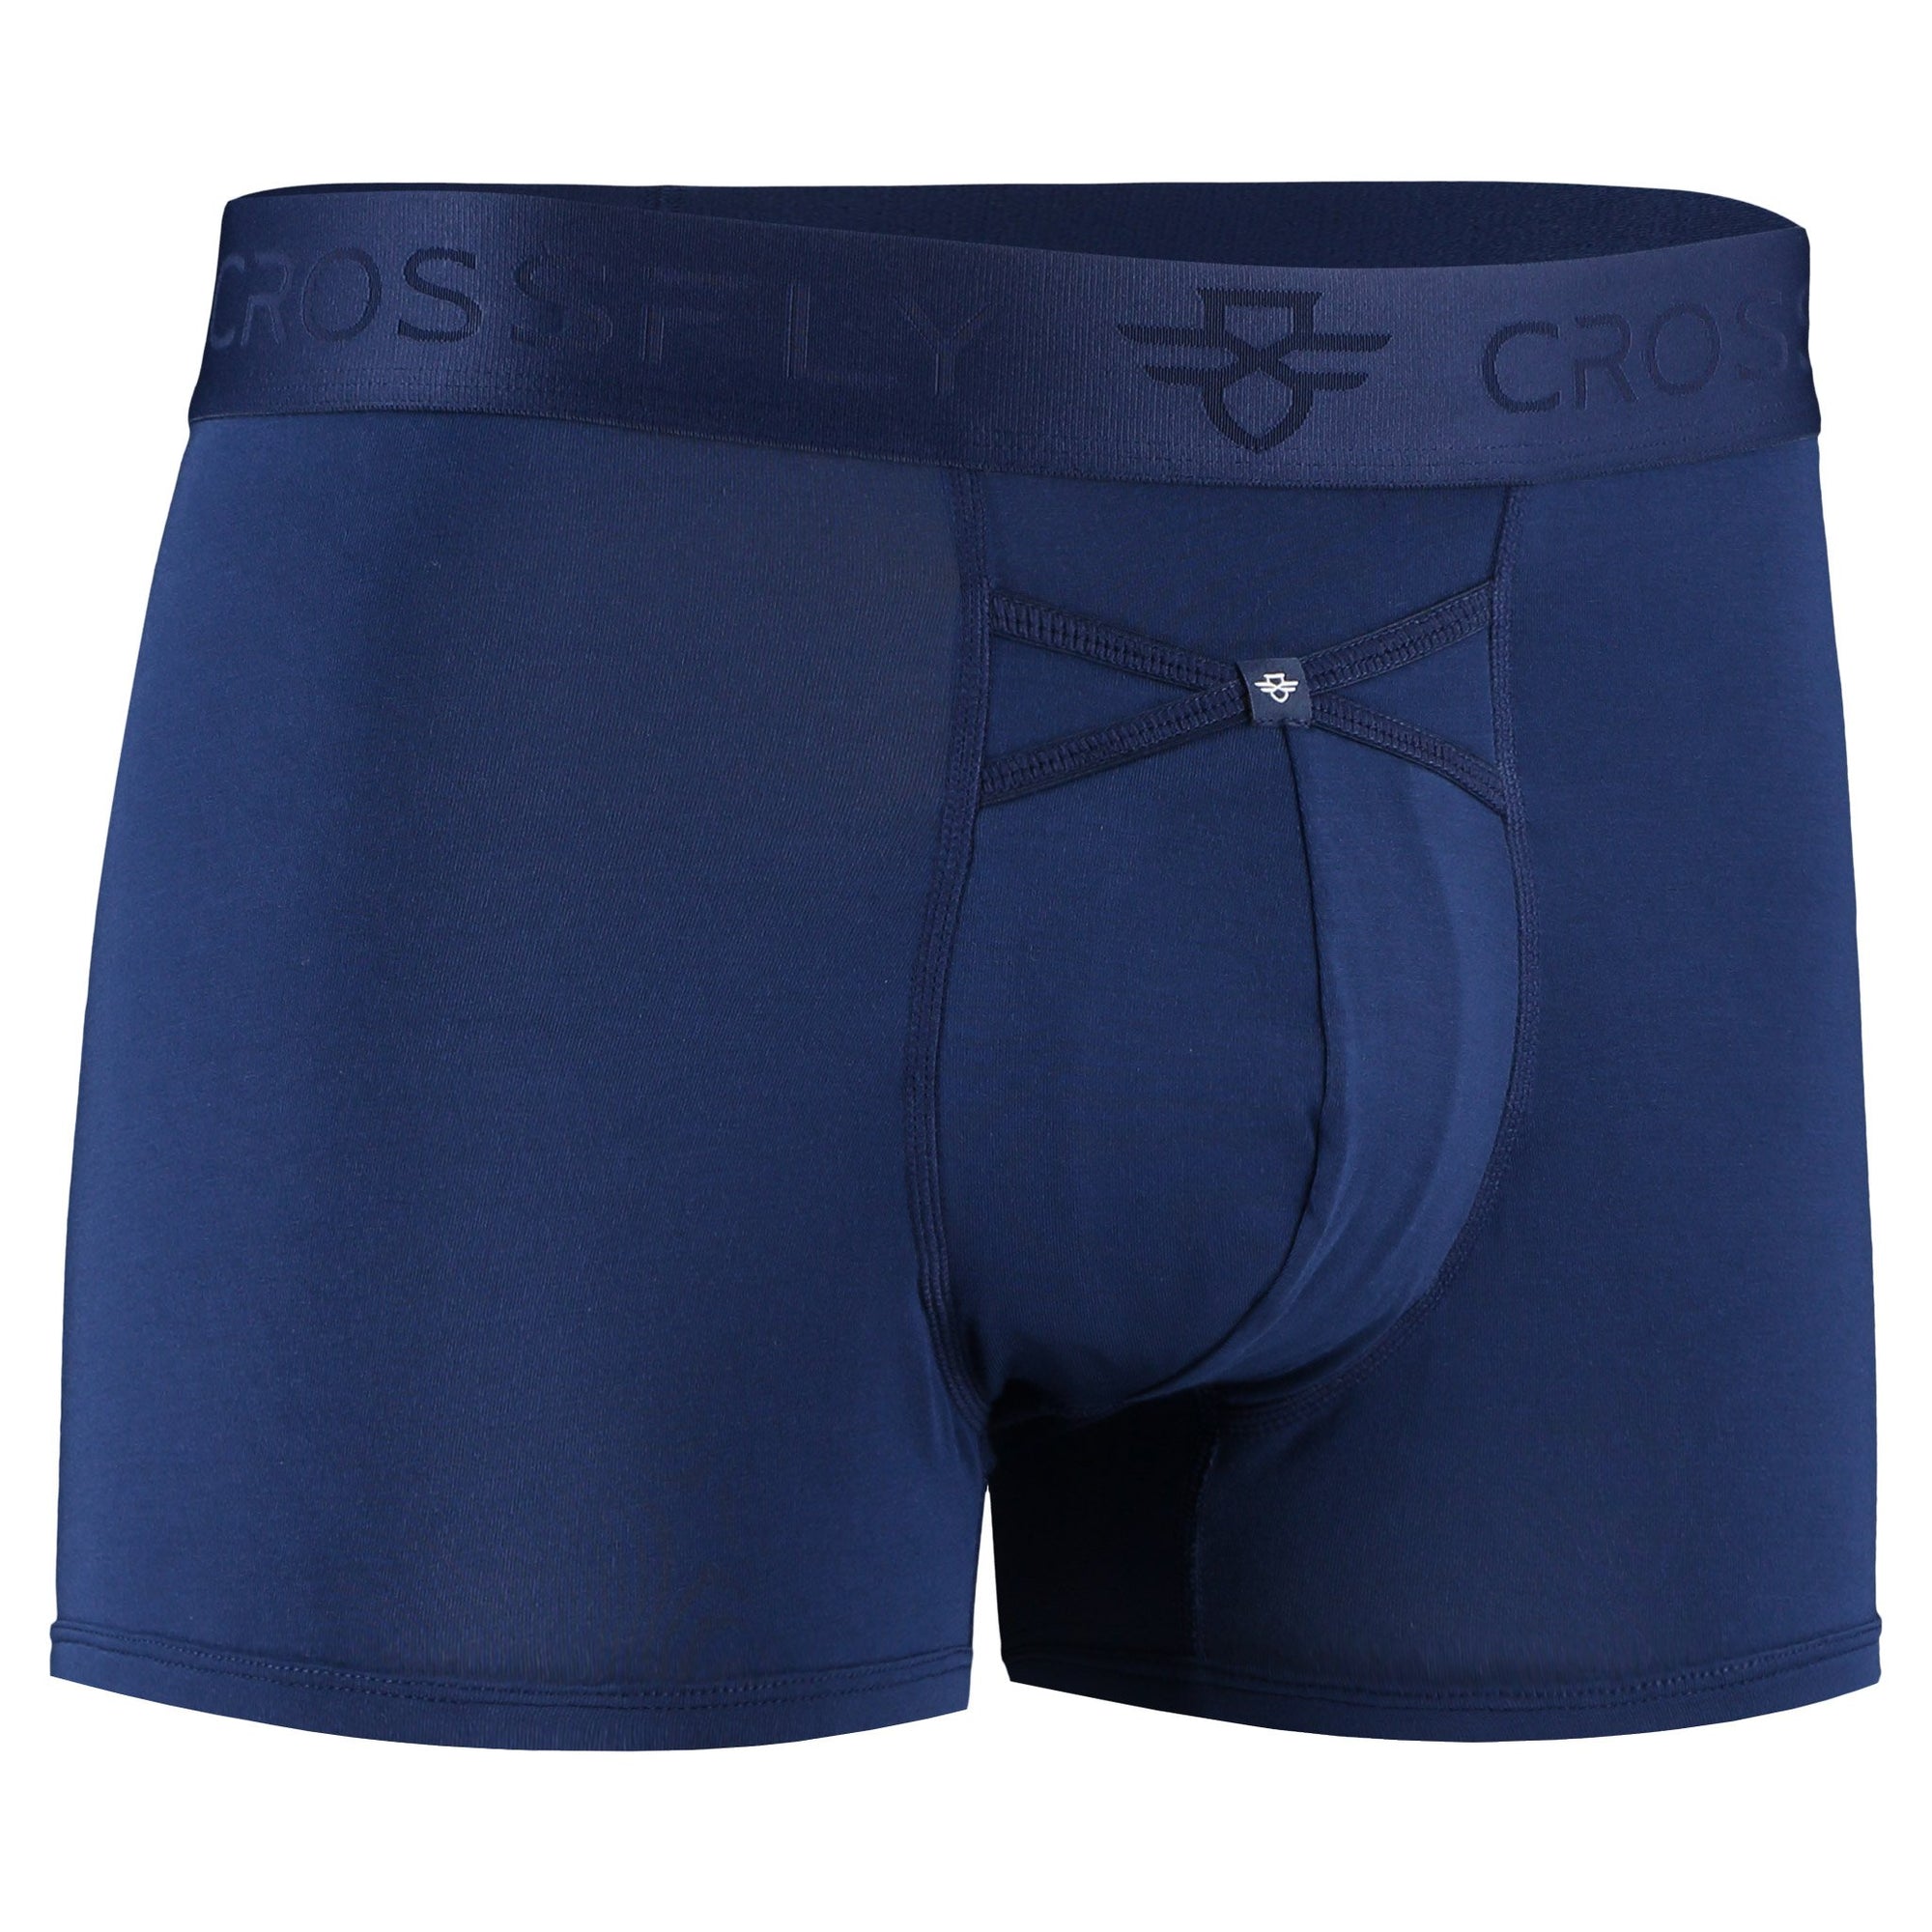 Crossfly men's IKON 3" navy trunks from the Everyday series, featuring X-Fly and Coccoon internal pocket support.